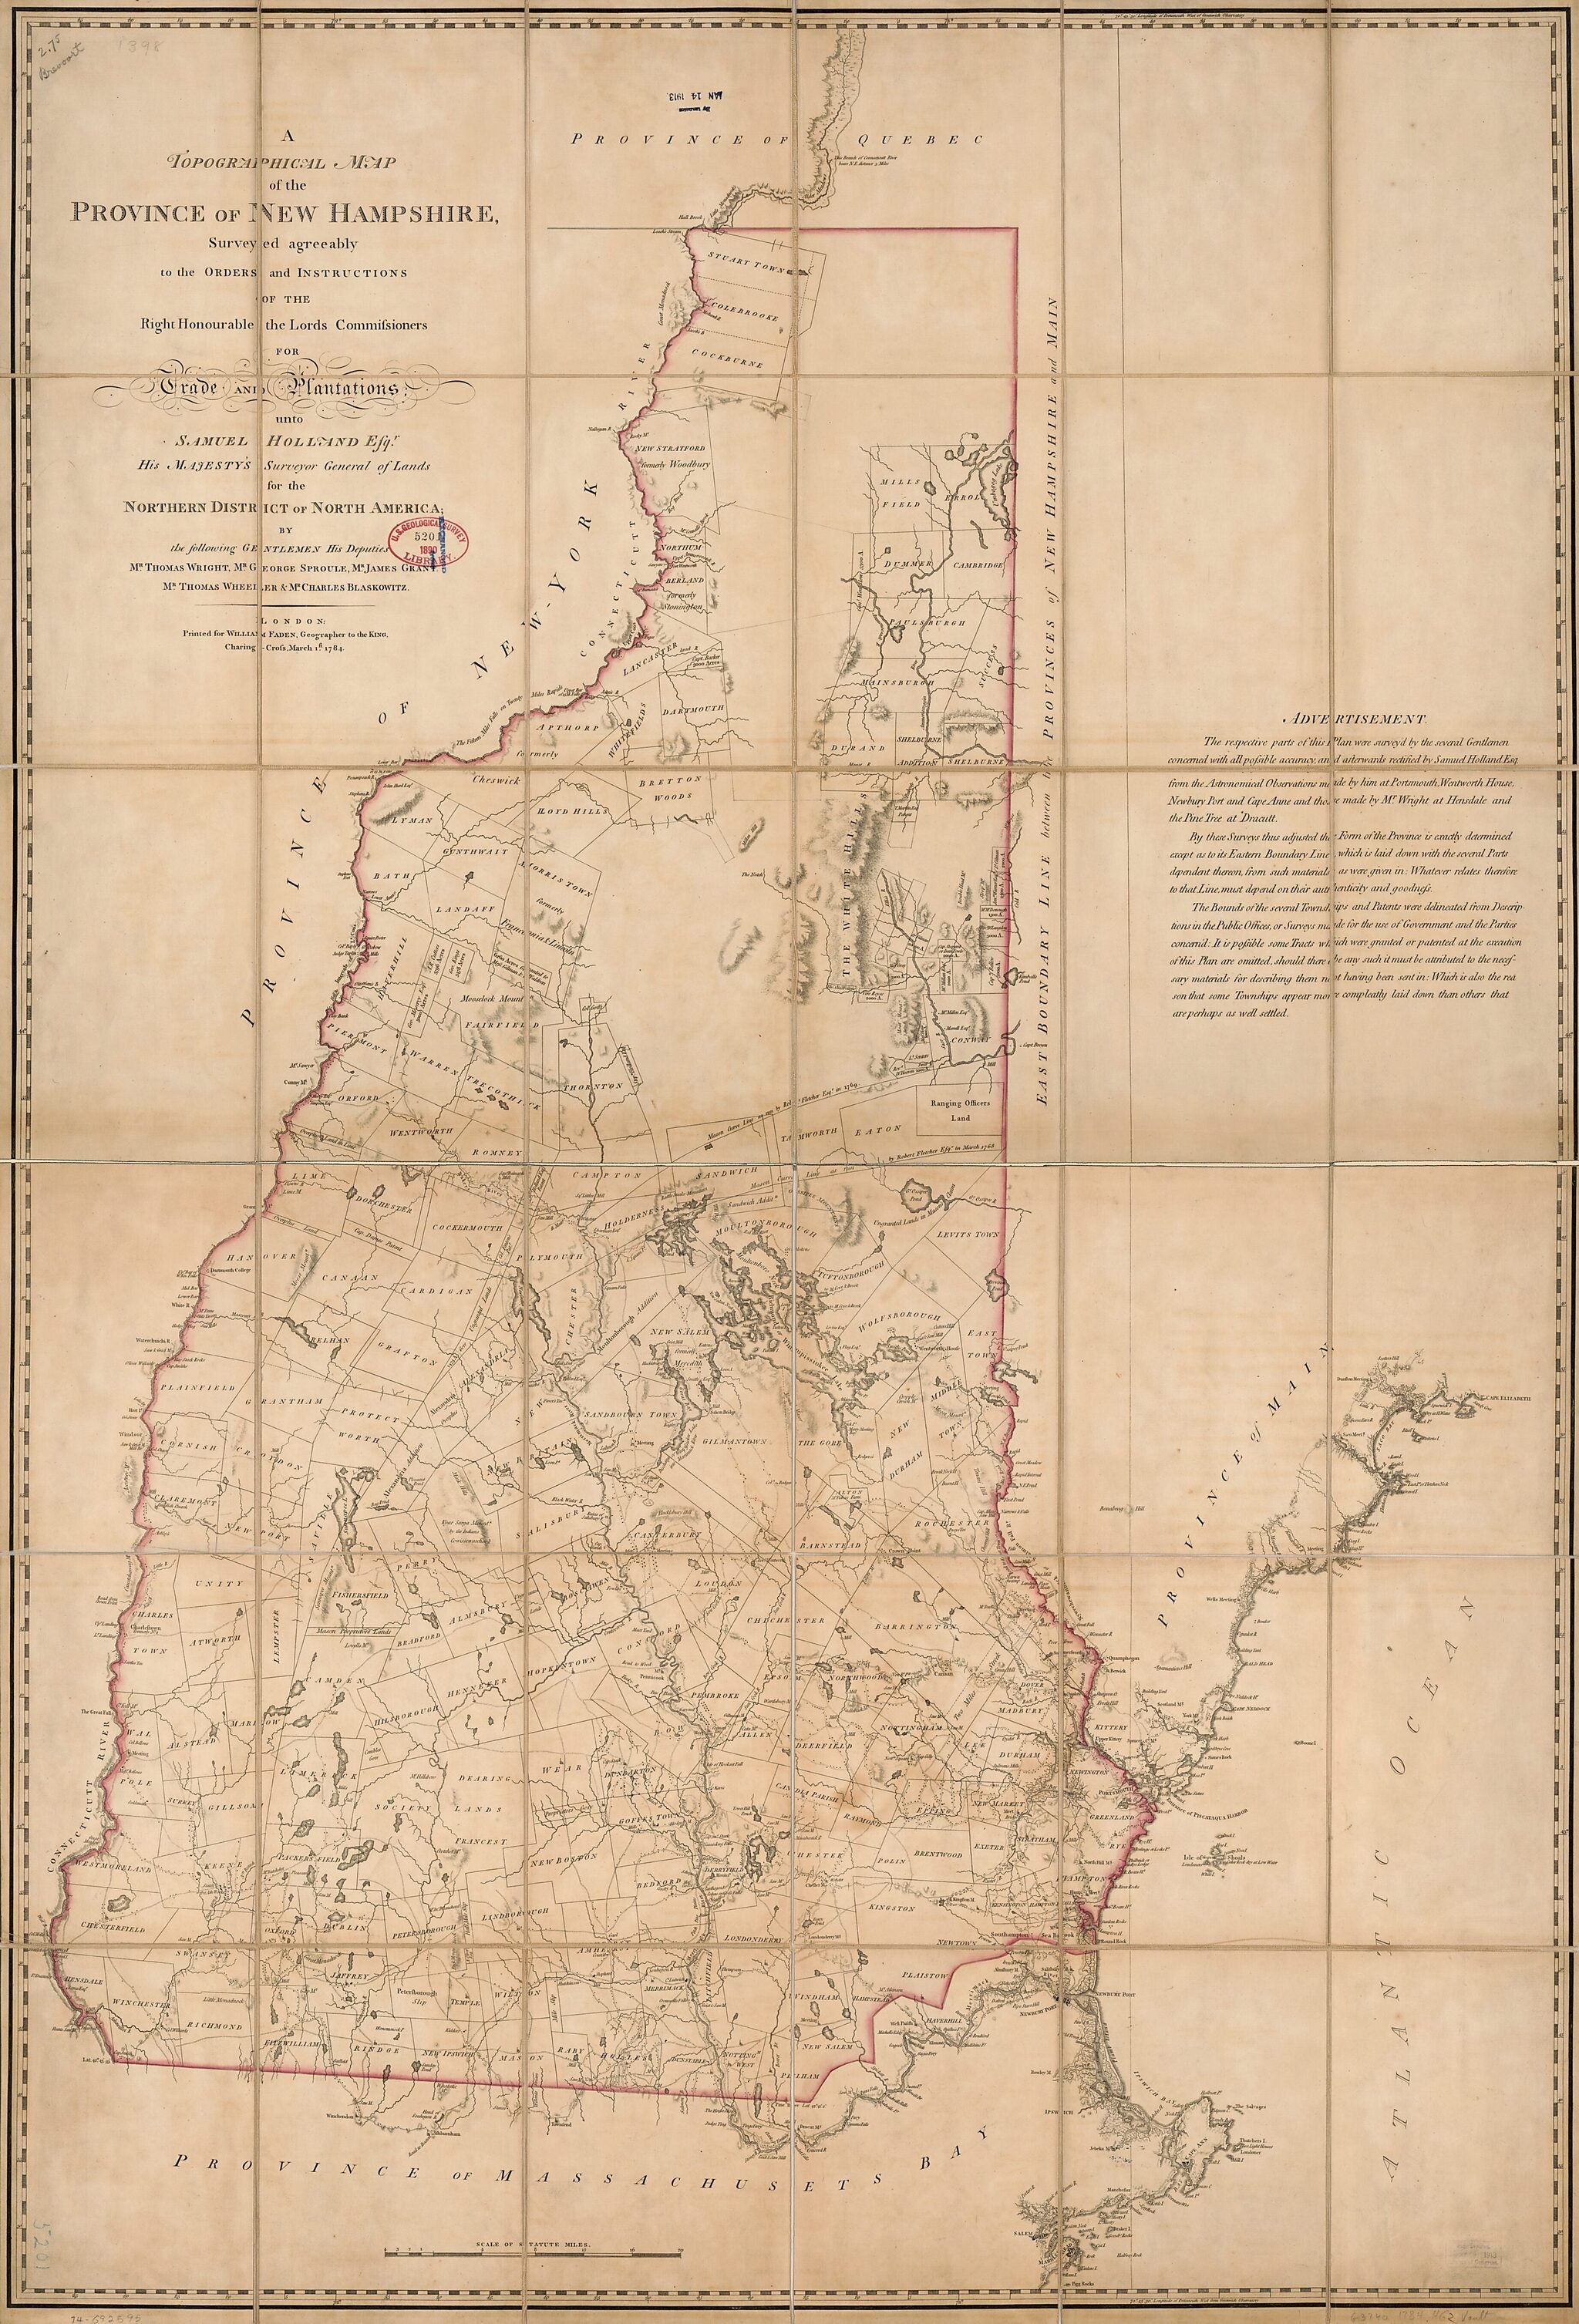 This old map of A Topographical Map of the Province of New Hampshire from 1784 was created by William Faden, Samuel Holland in 1784